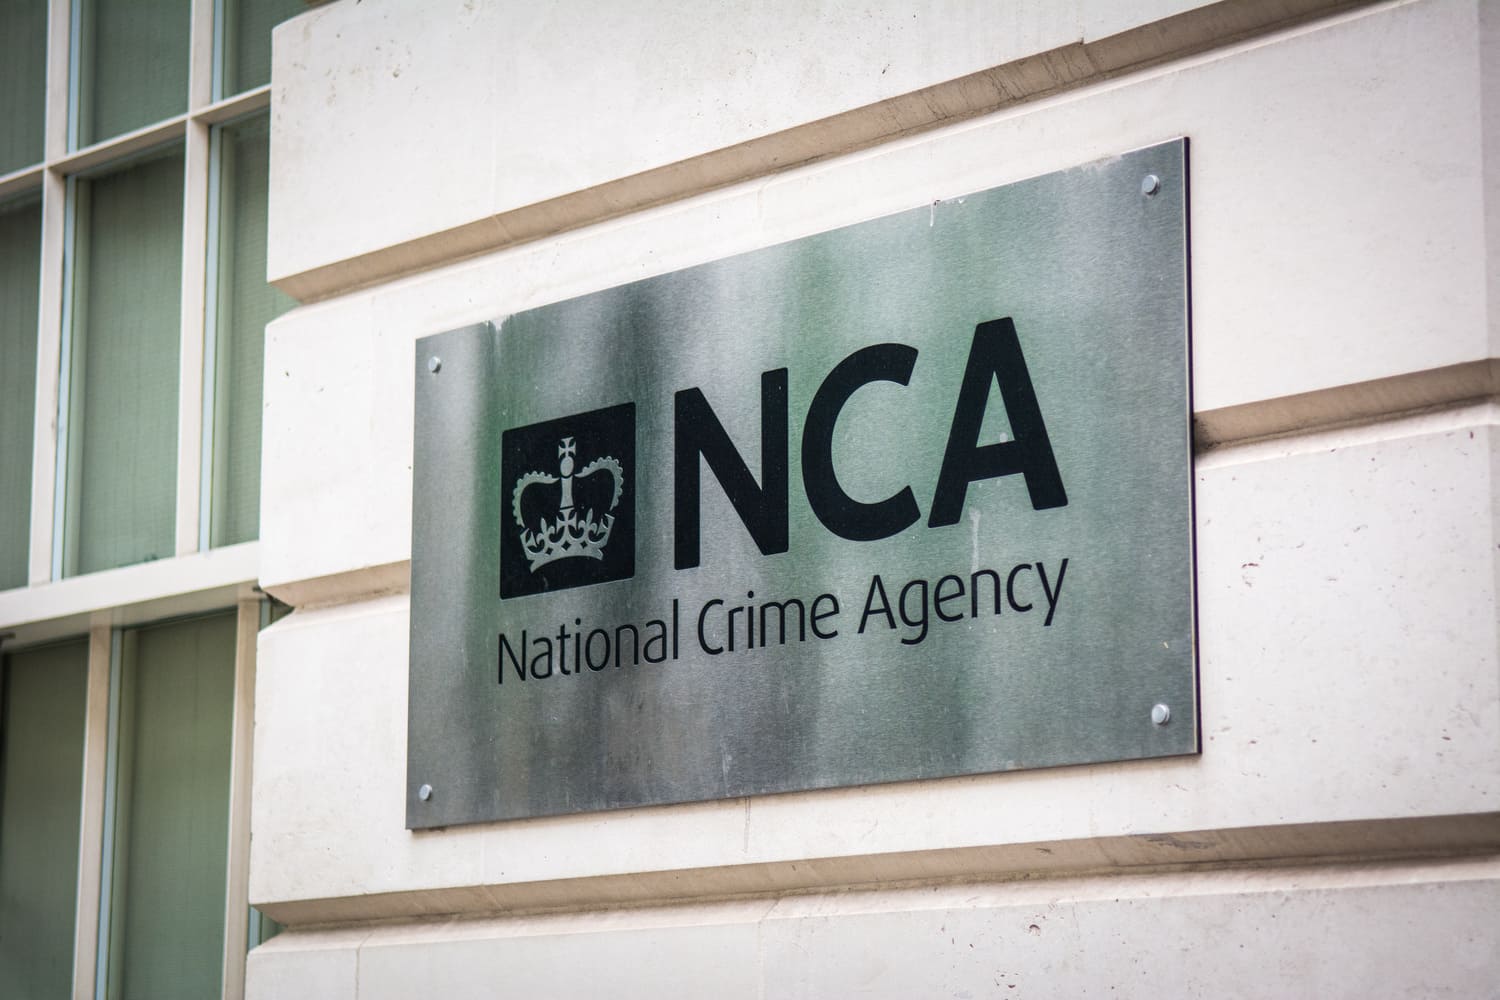  UK National Crime Agency seized £27m in crypto last year